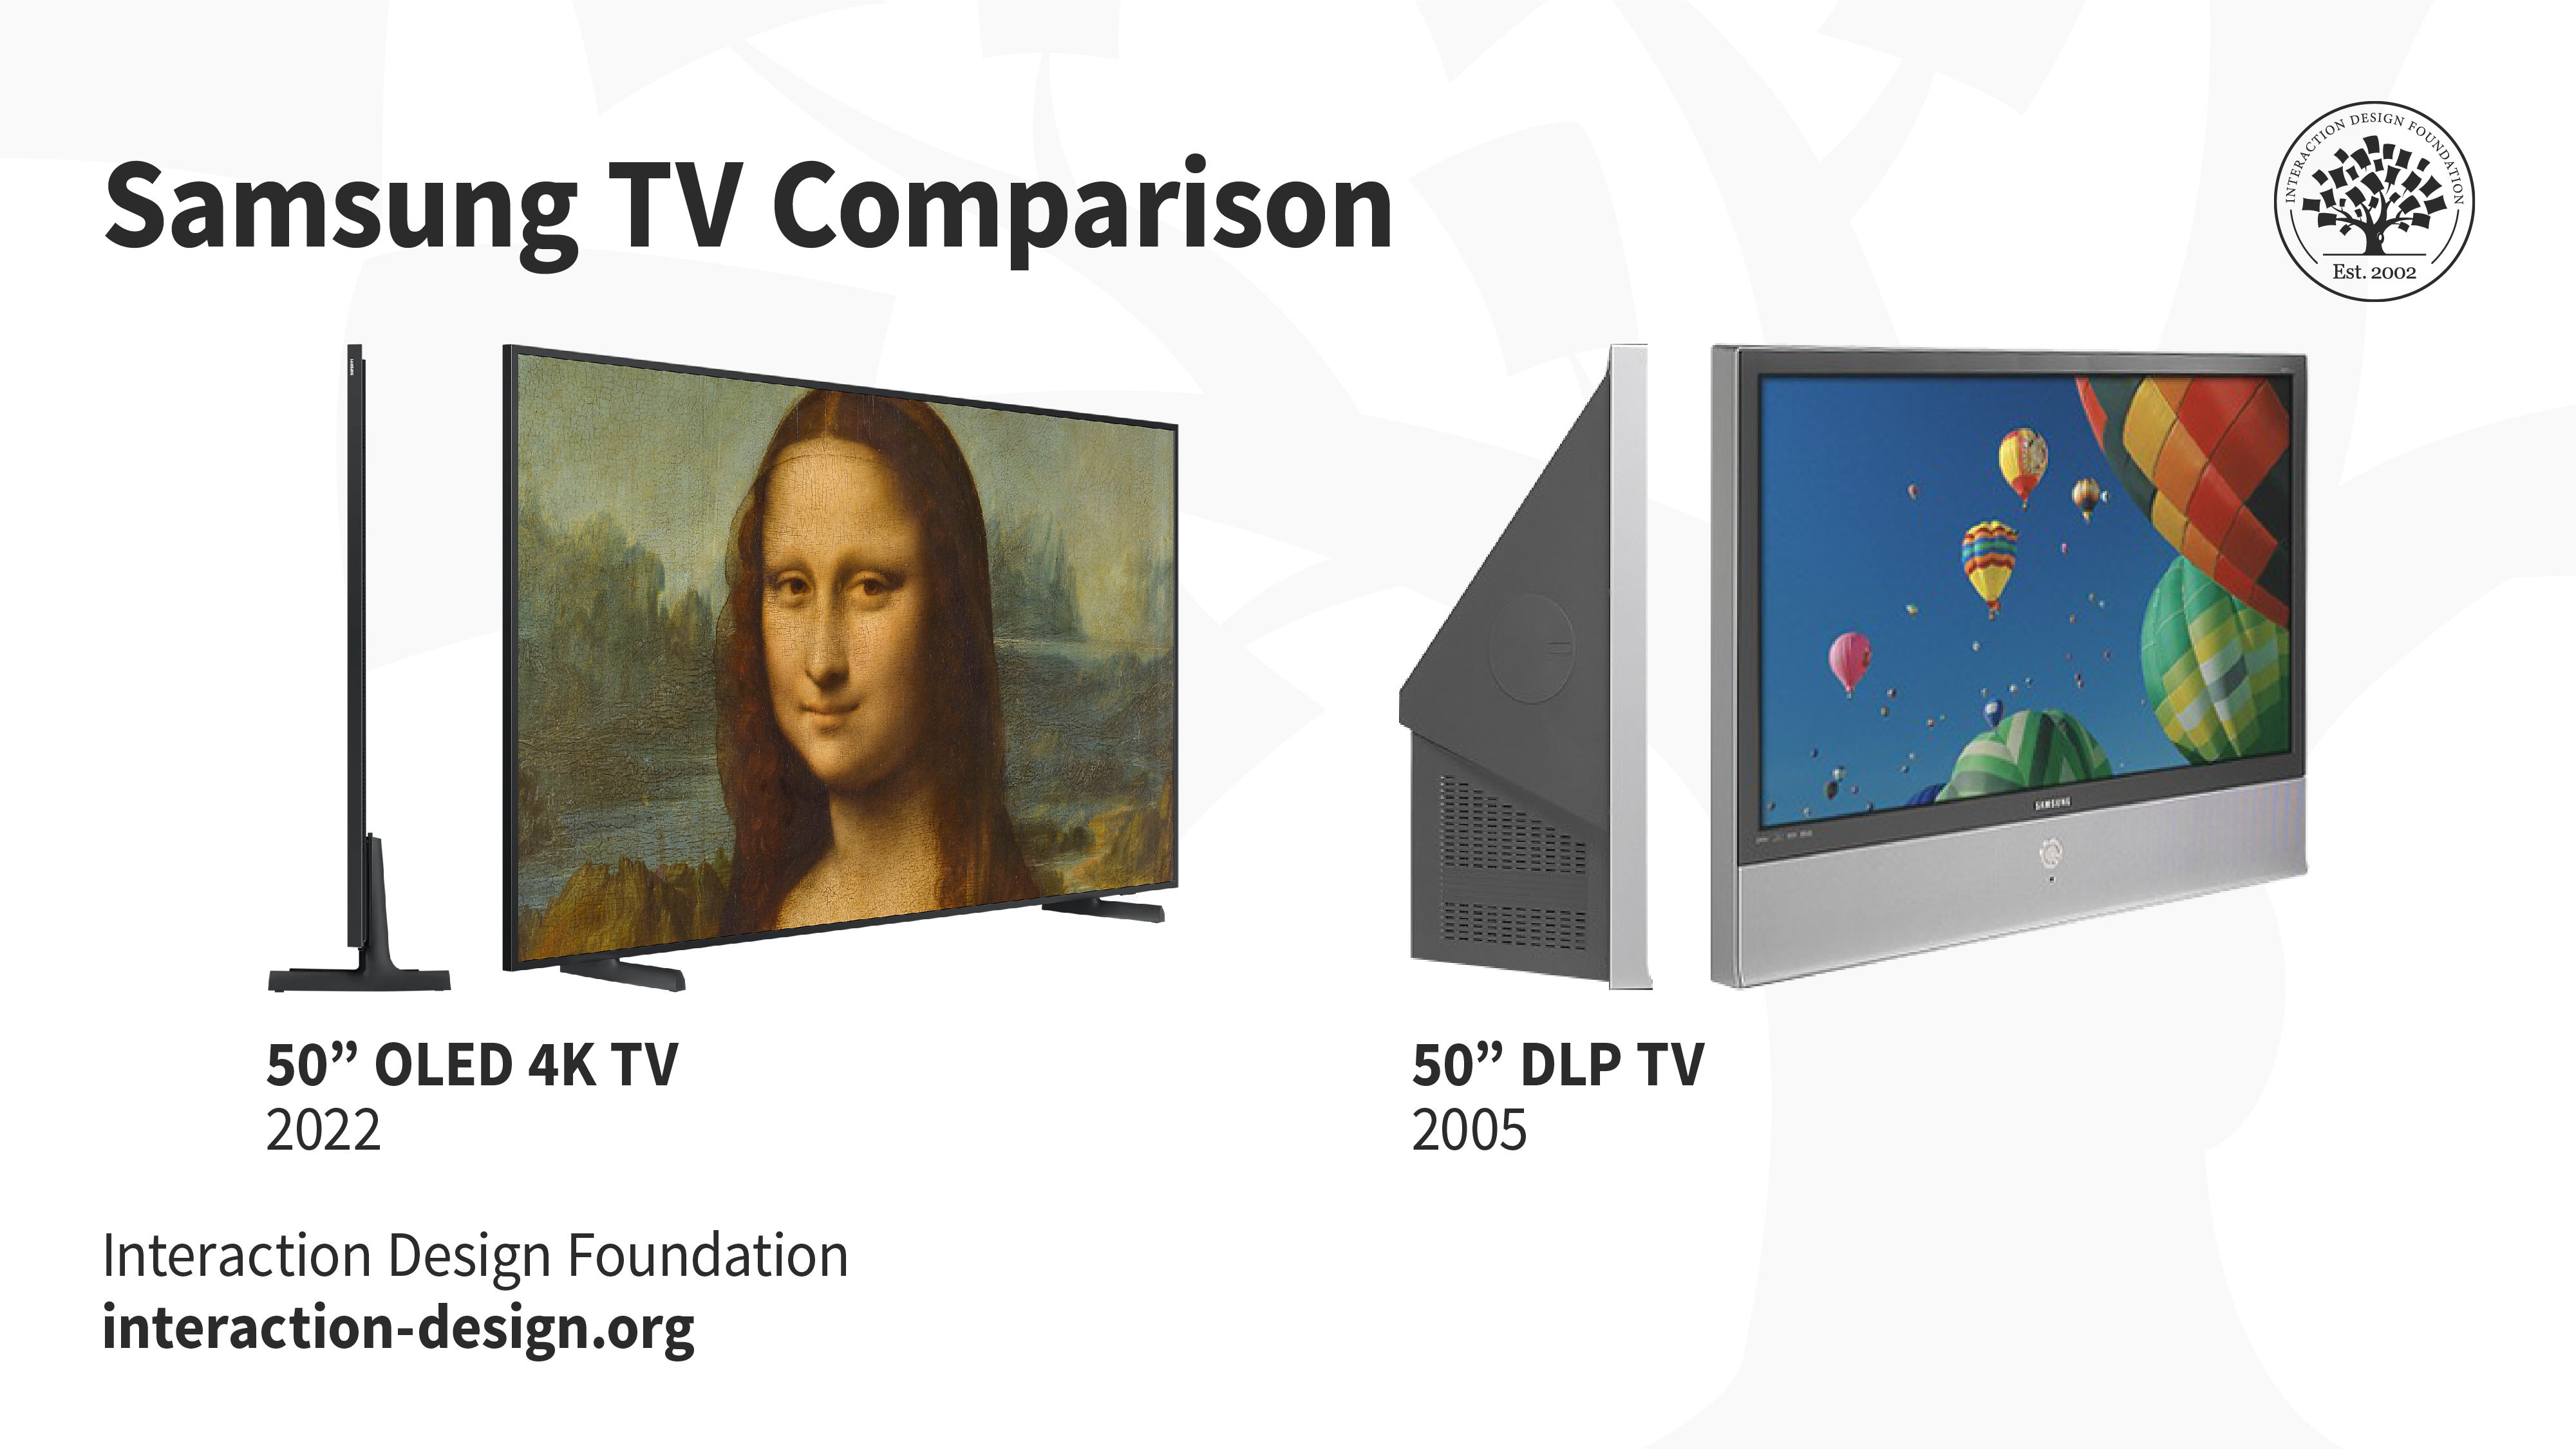 Side-by-side comparison of Samsung TVs from 2022 and 2005 highlighting how much thinner the newer TVs are.